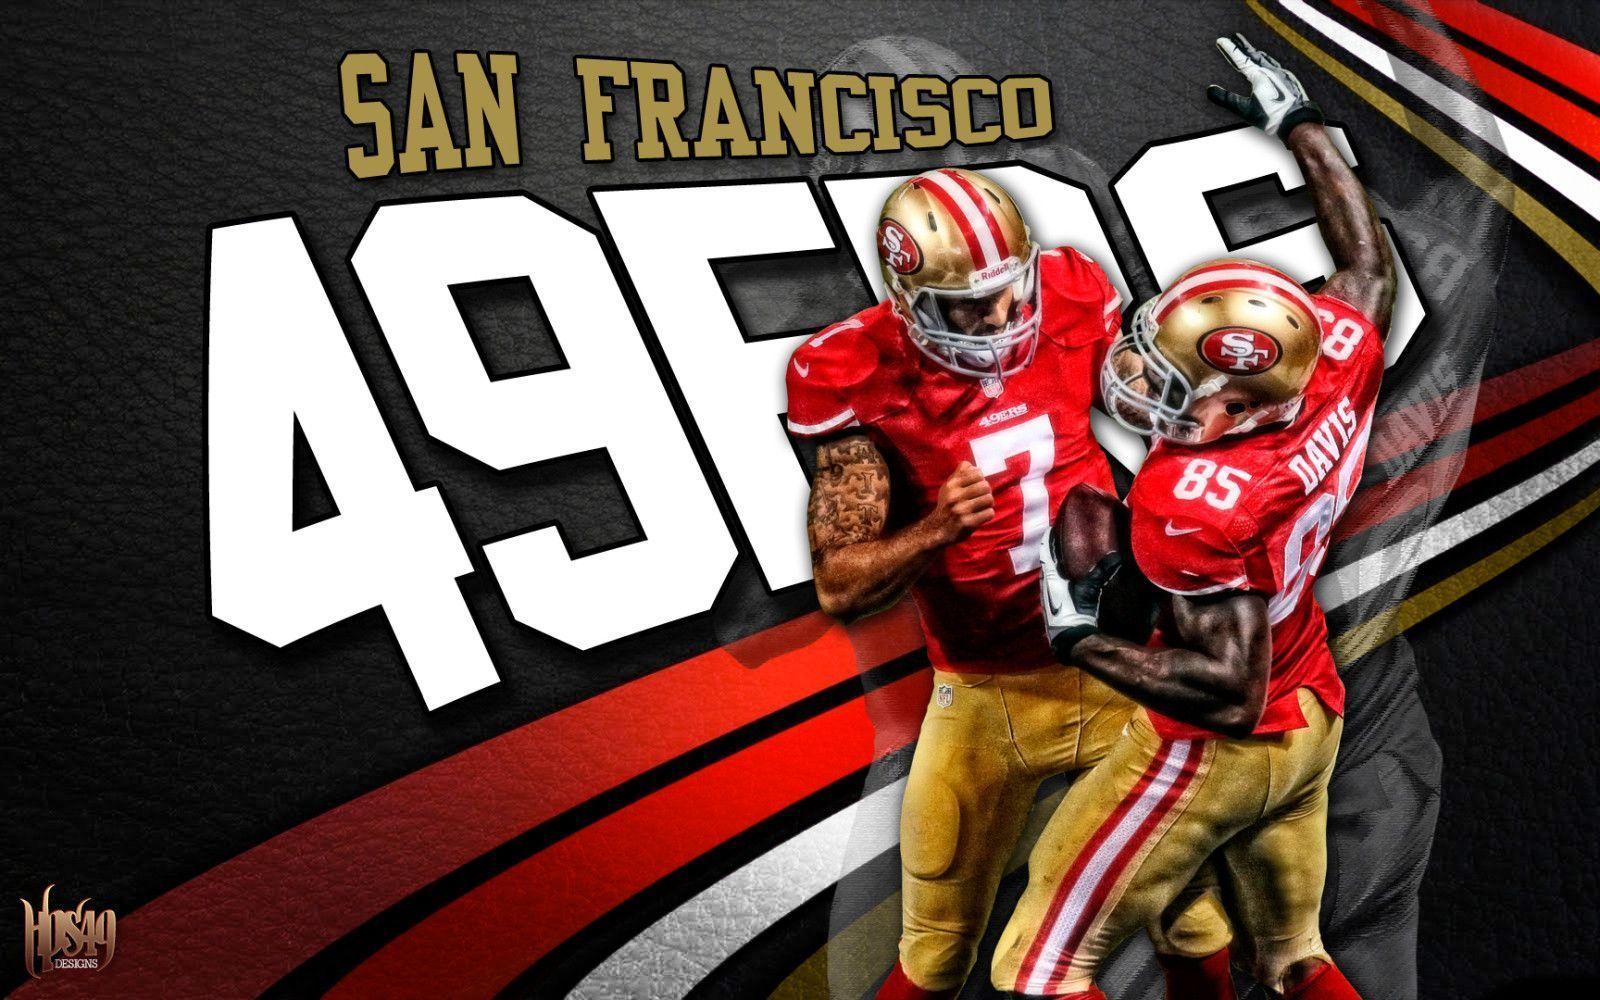 49ers wallpaper 9 - Image And Wallpaper free to download